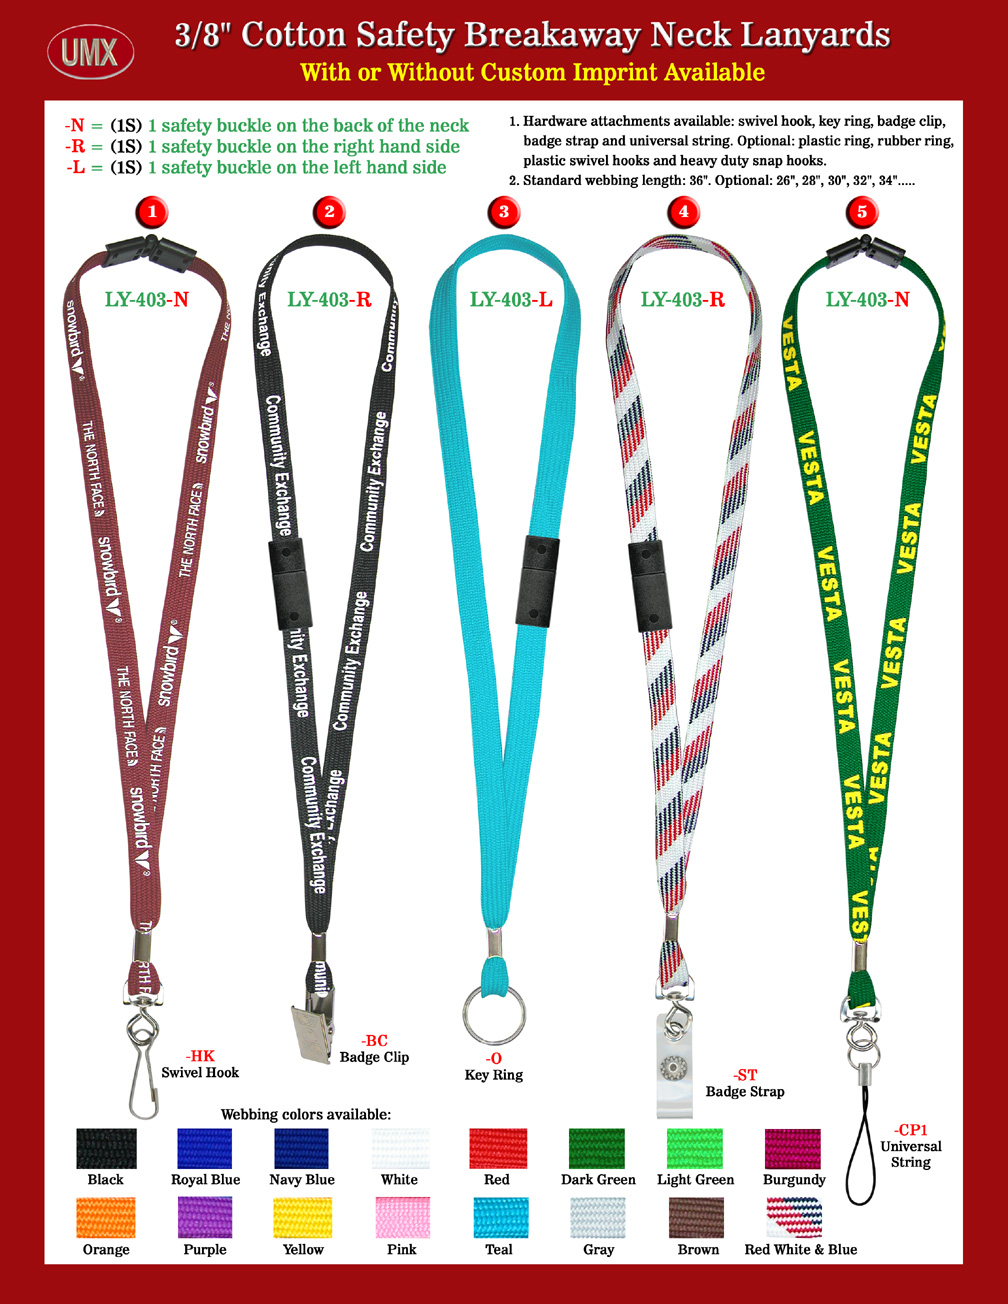 LY-403 Small Size Safety ID Lanyards With Swingable Compact Size Breakaway Buckles.